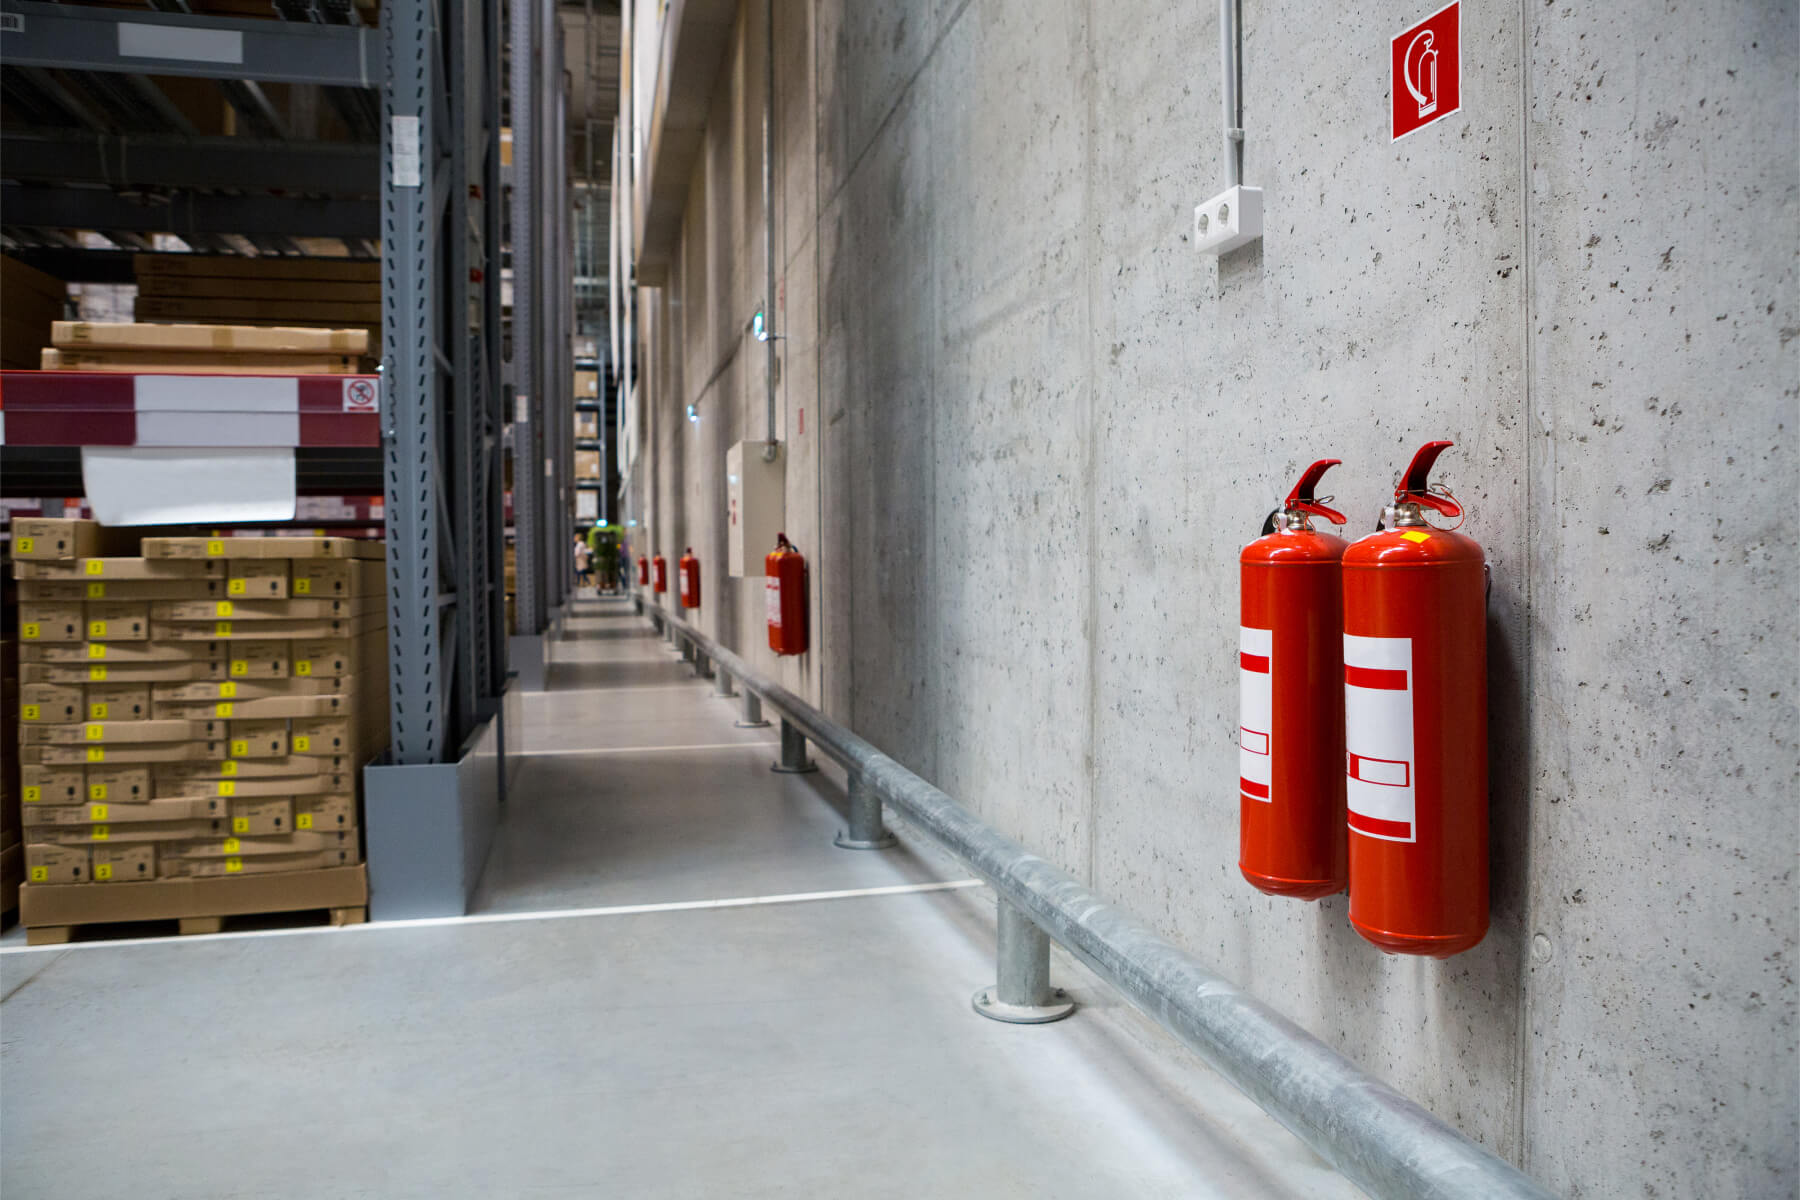 Warehouse hallways with two fire extinguishers